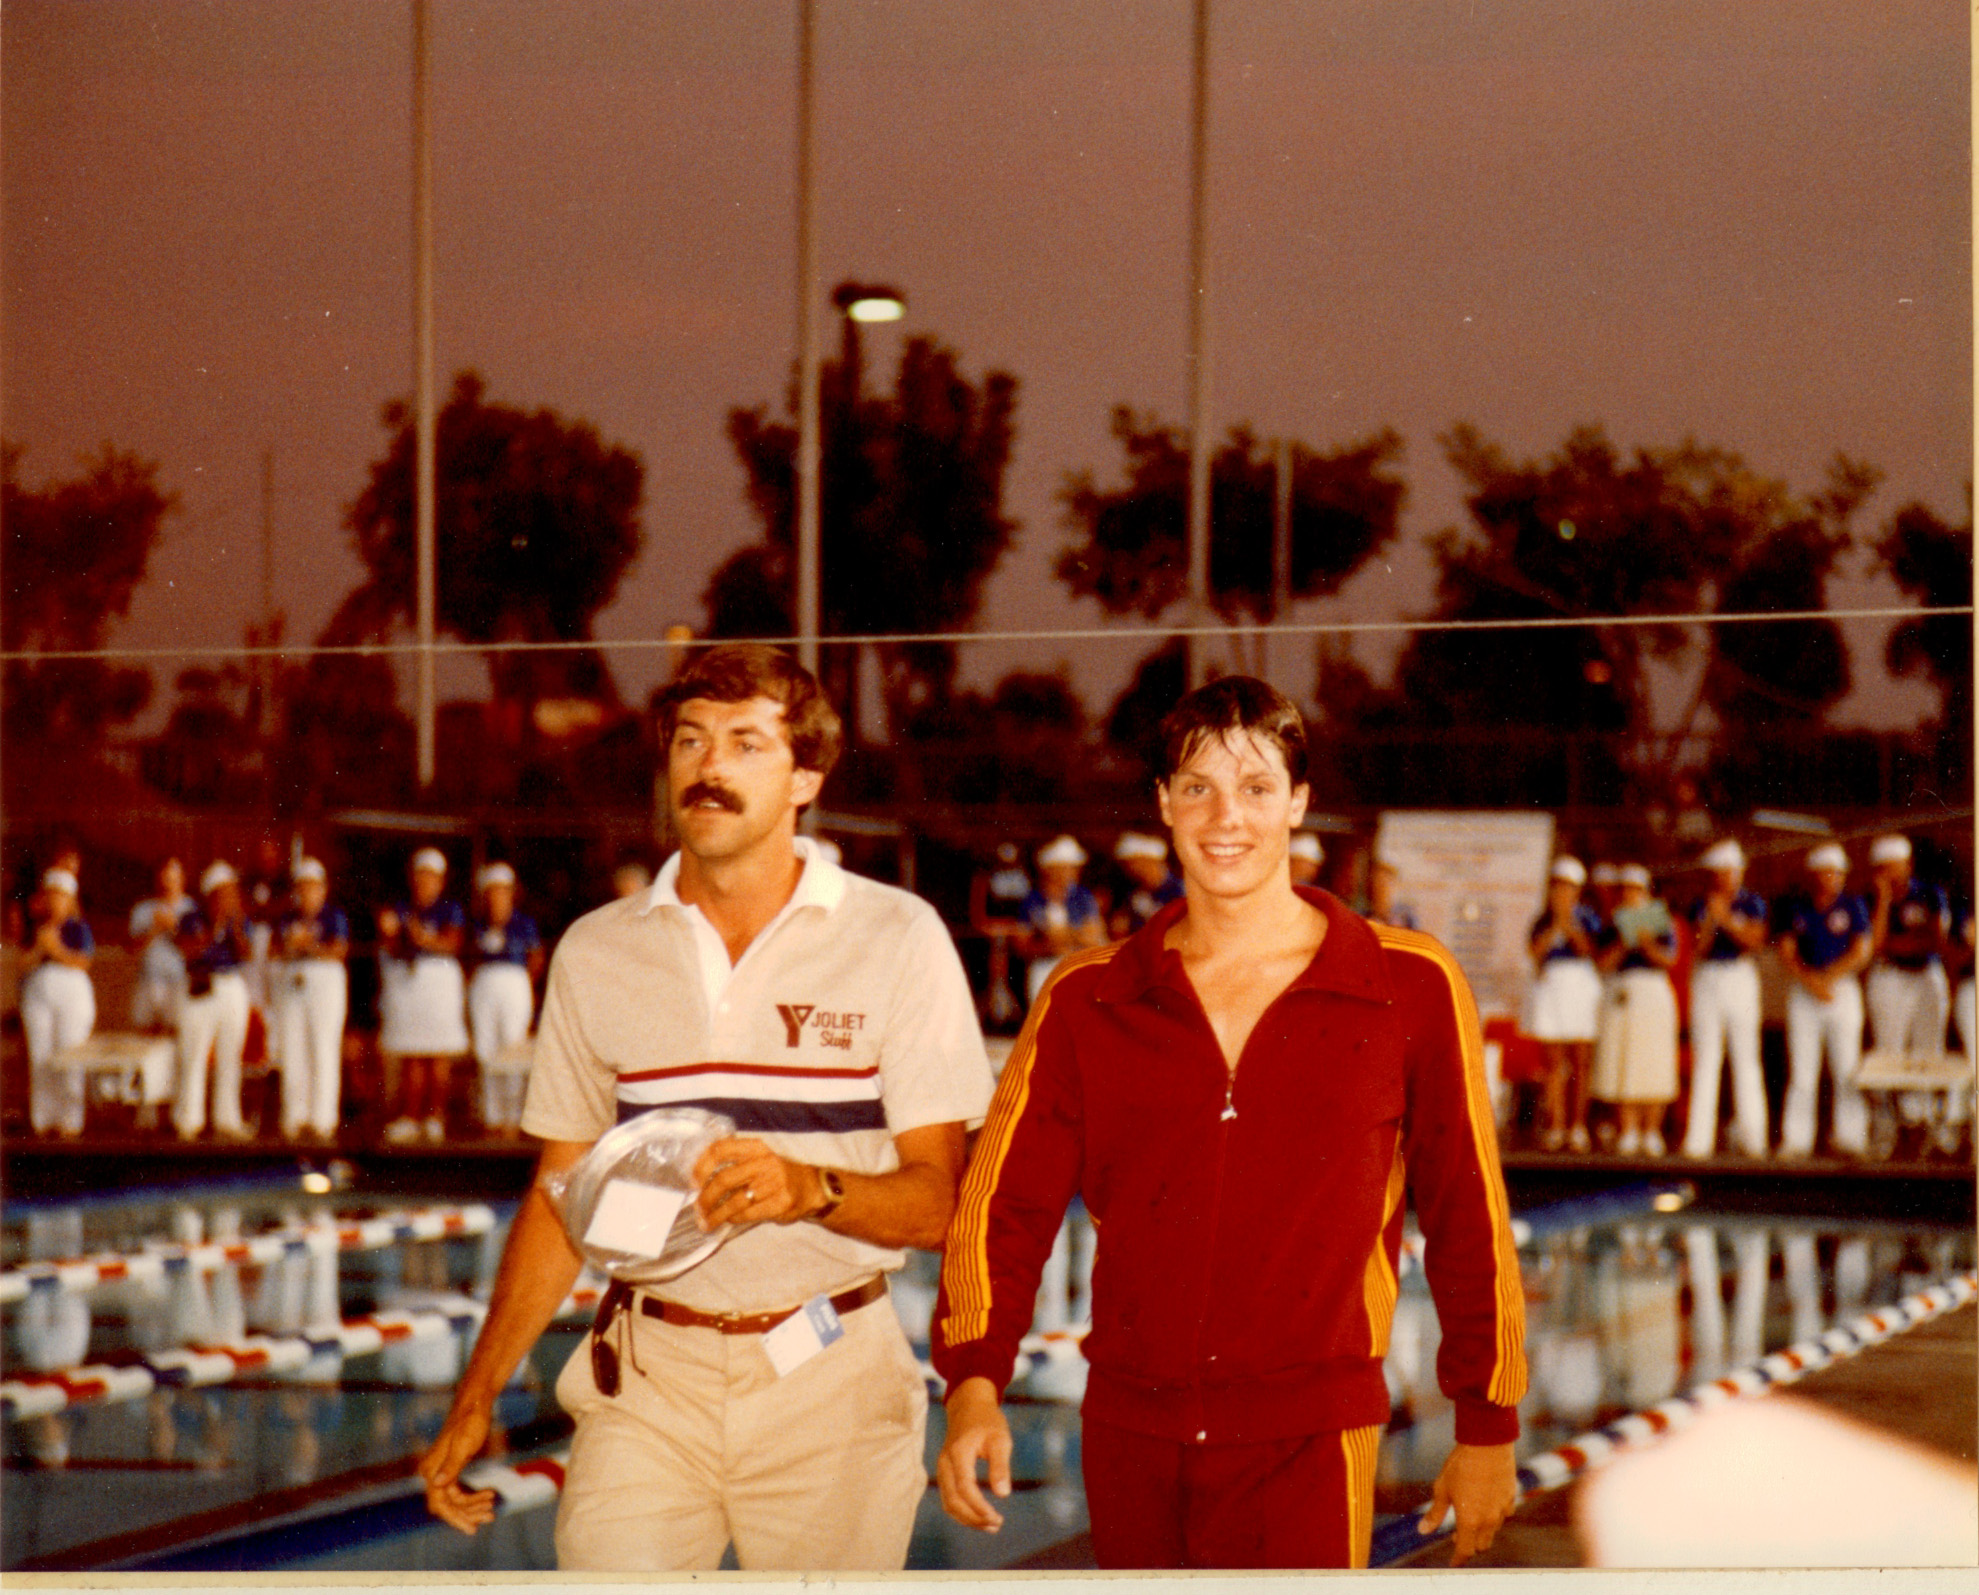 David Sims with Coach Tim Hill at 1980 Olympic Trials